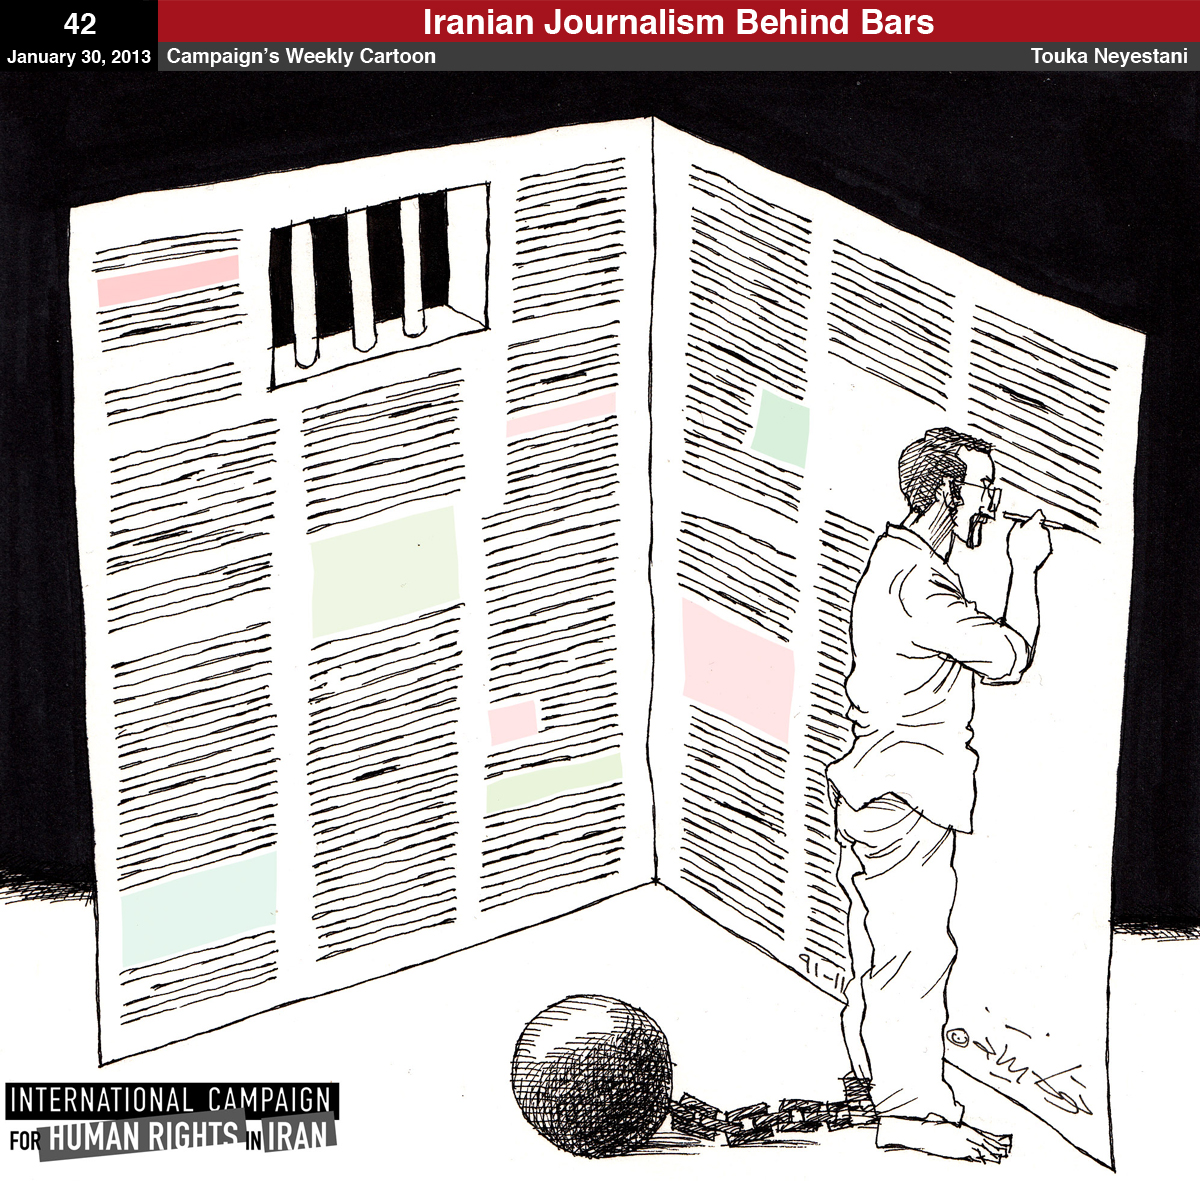 Cartoon 42: Iranian Journalism Behind Bars – Center for Human Rights in Iran